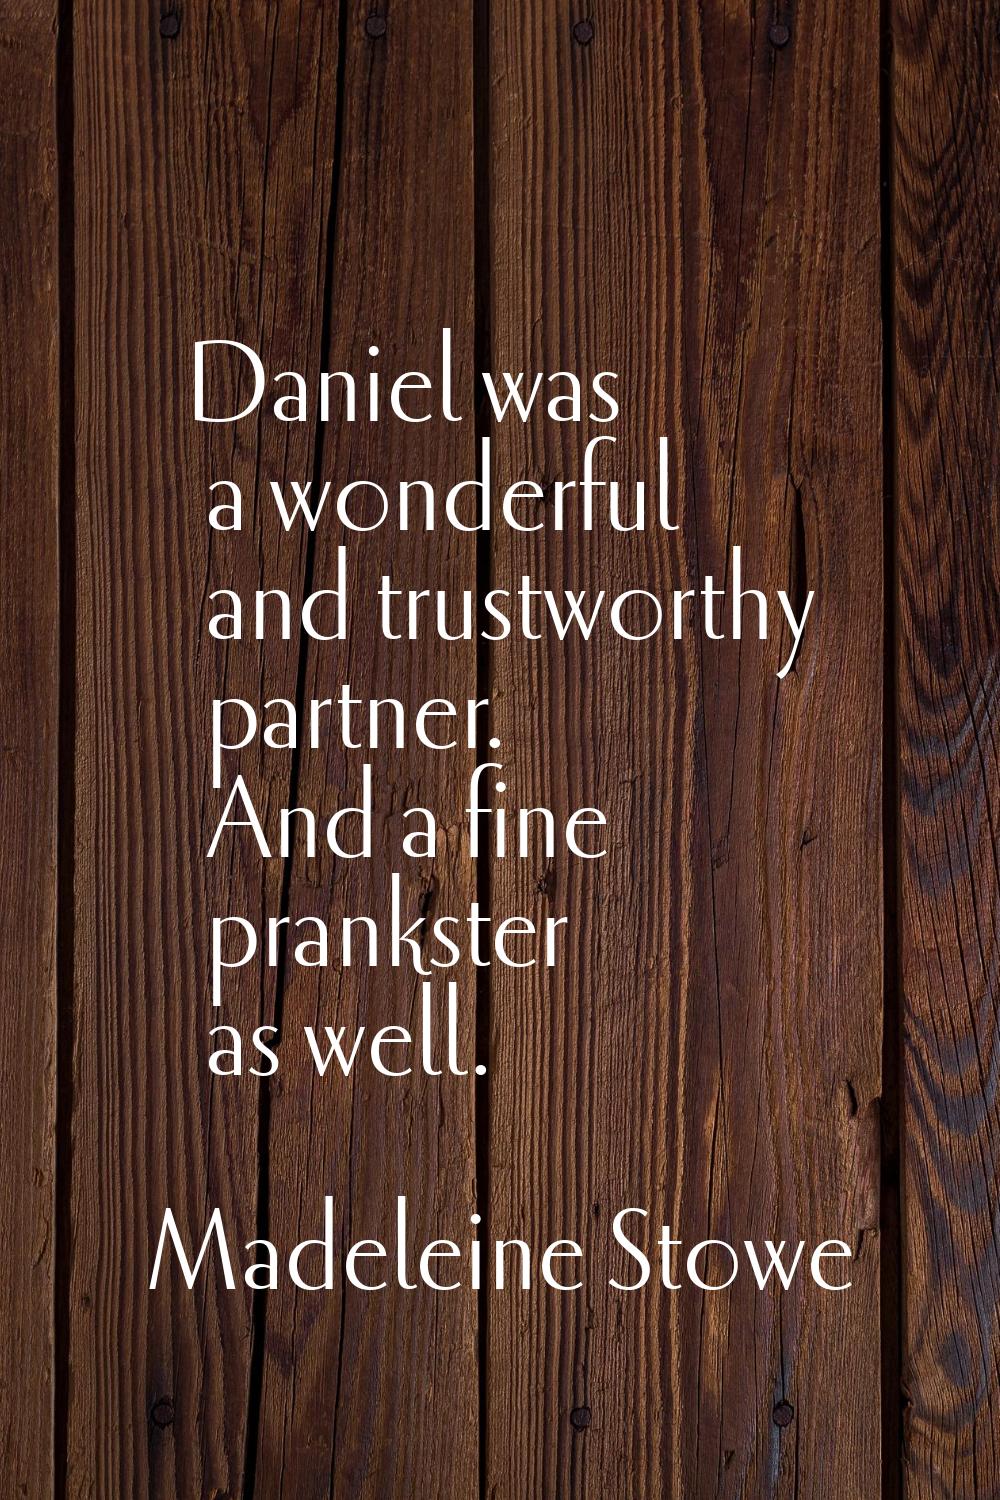 Daniel was a wonderful and trustworthy partner. And a fine prankster as well.